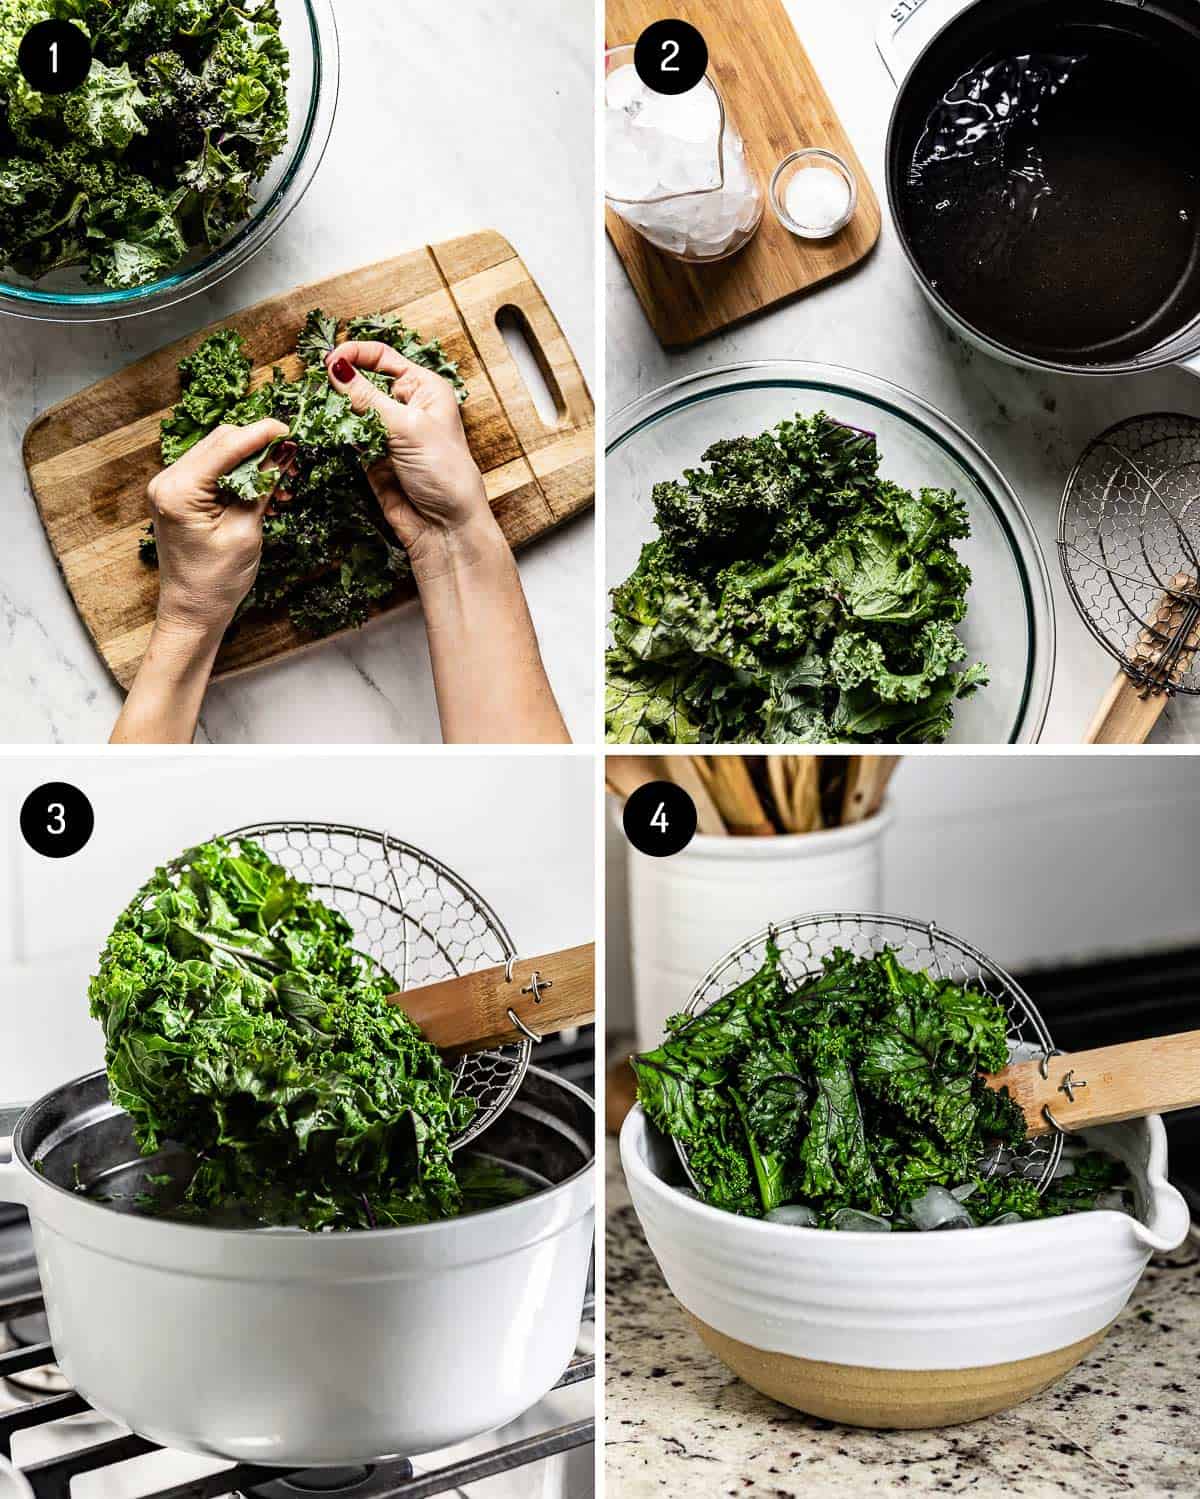 A person showing how to blanch kale from the top view.